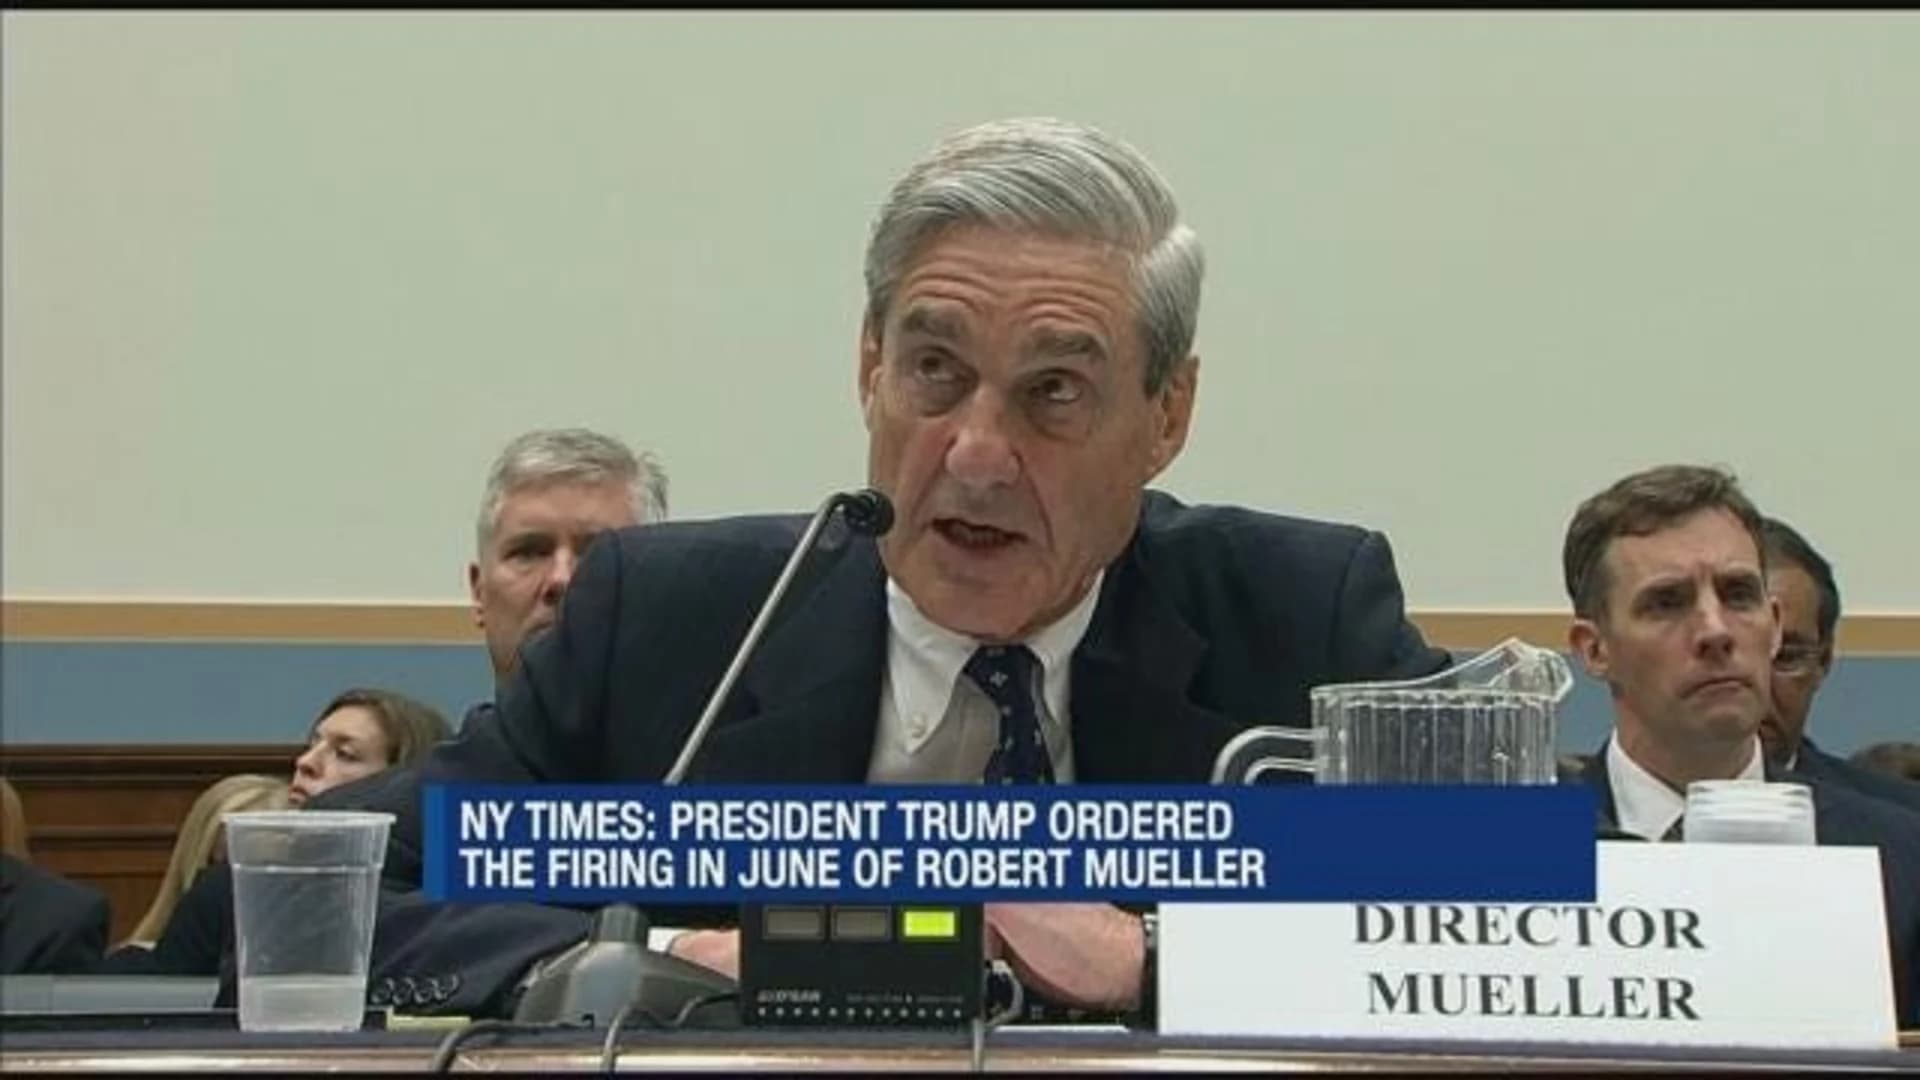 Report: Trump wanted Mueller fired, backed off